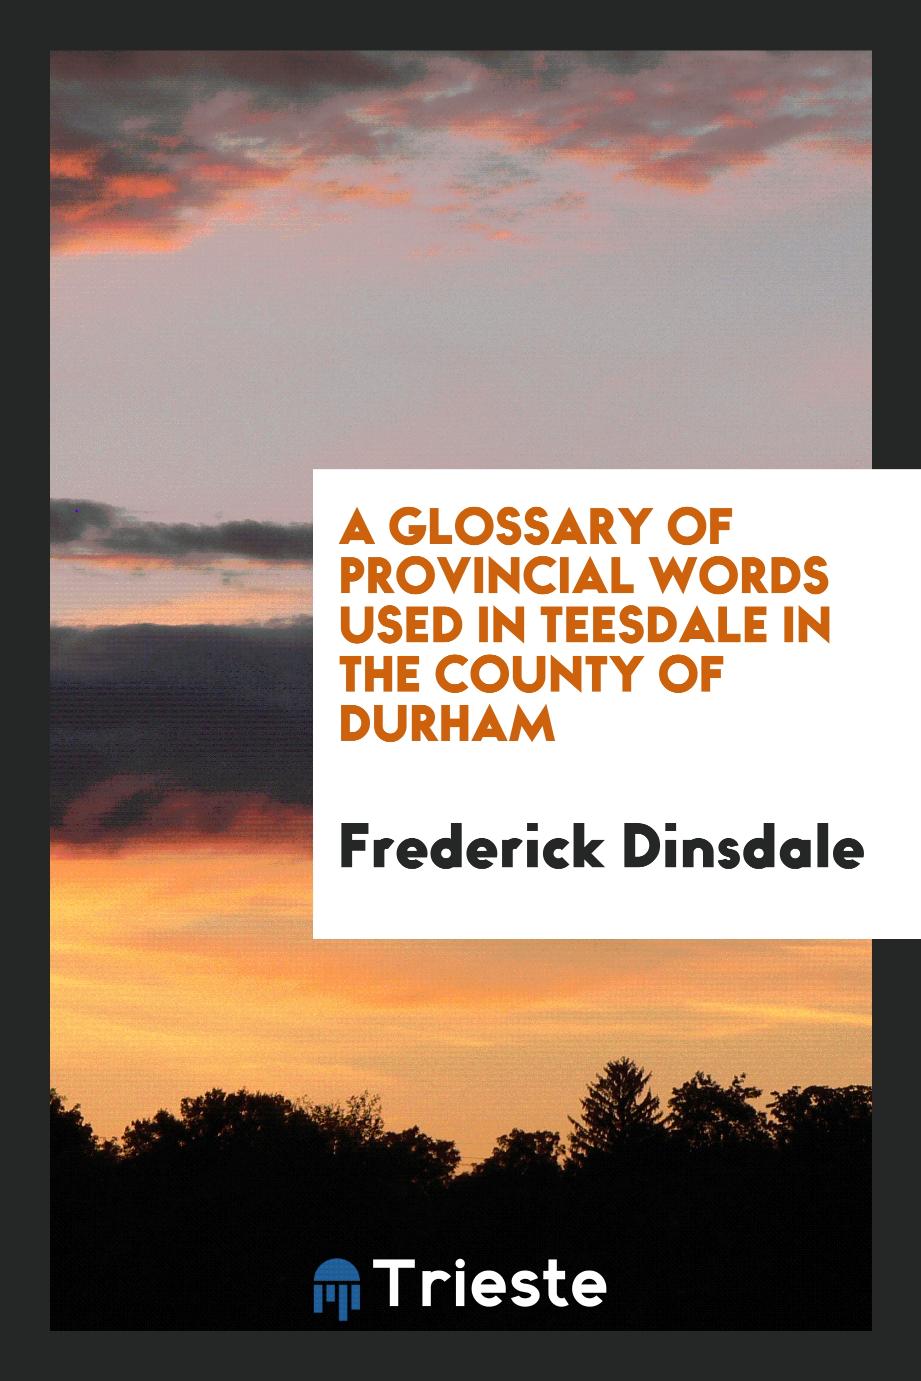 A Glossary of Provincial Words Used in Teesdale in the County of Durham